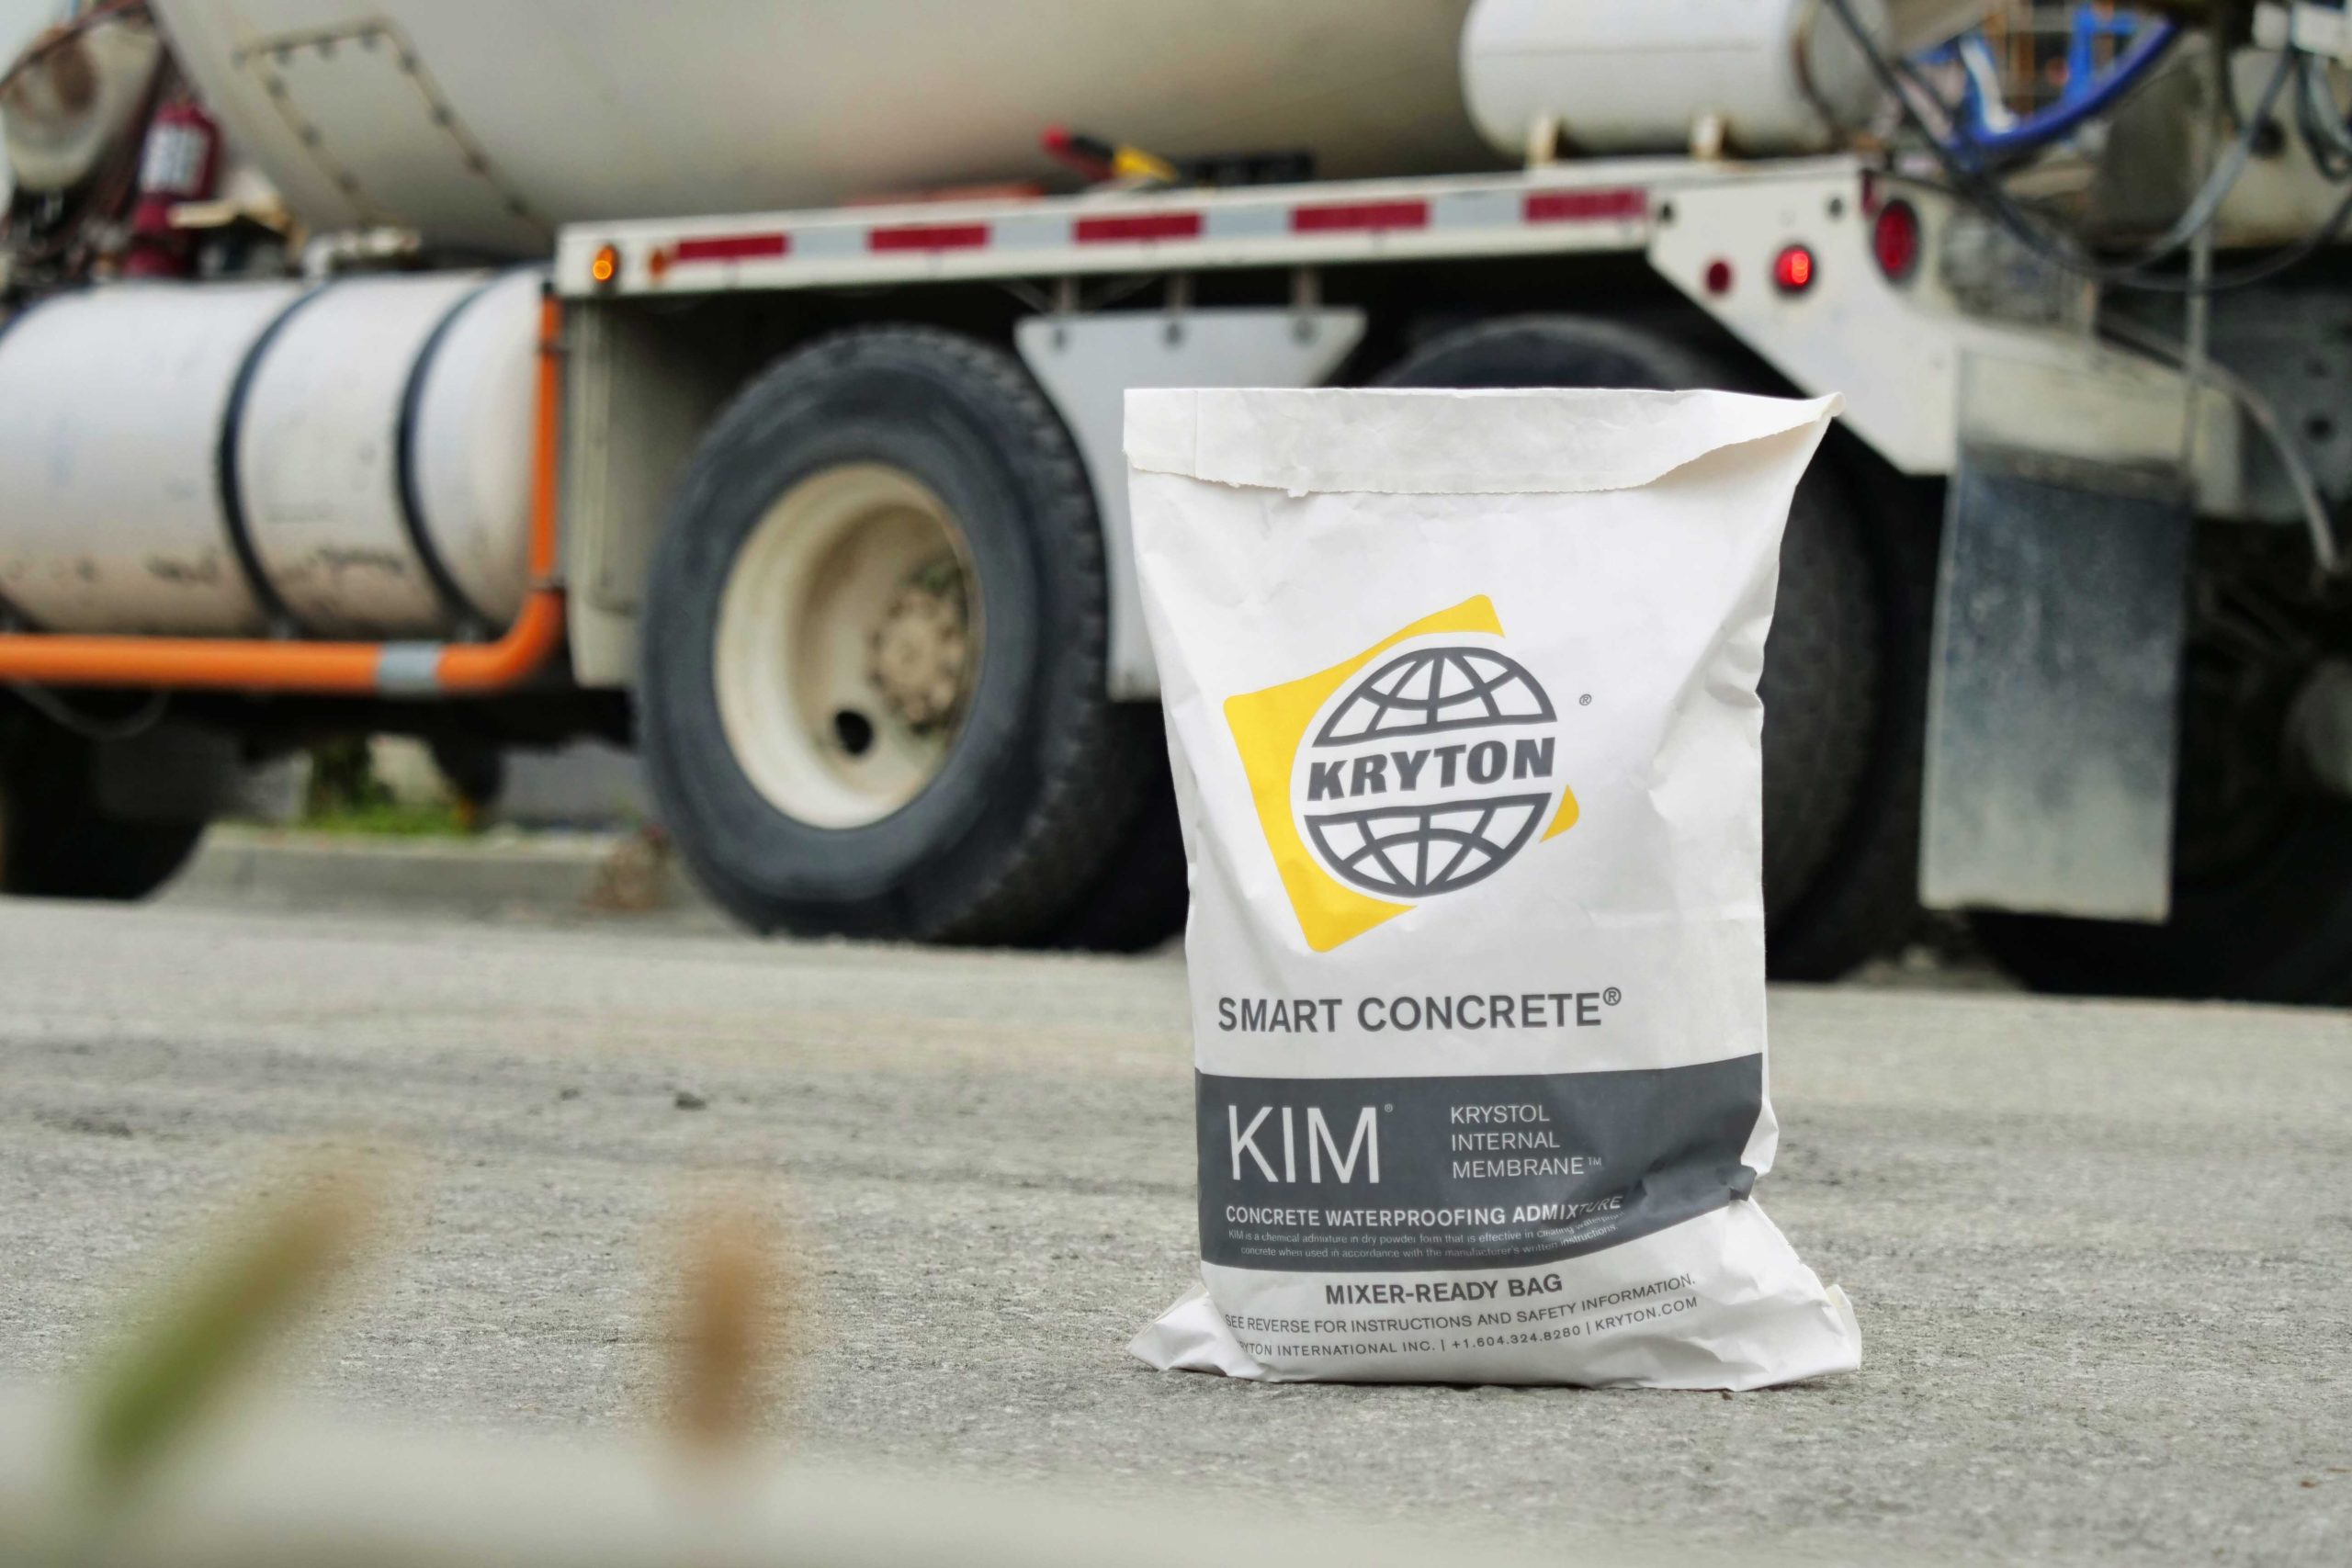 A bag of one of Kryton's Smart Concrete solutions, KIM, sits on concrete pavement in the foreground while a ready-mix truck is parked in the background.